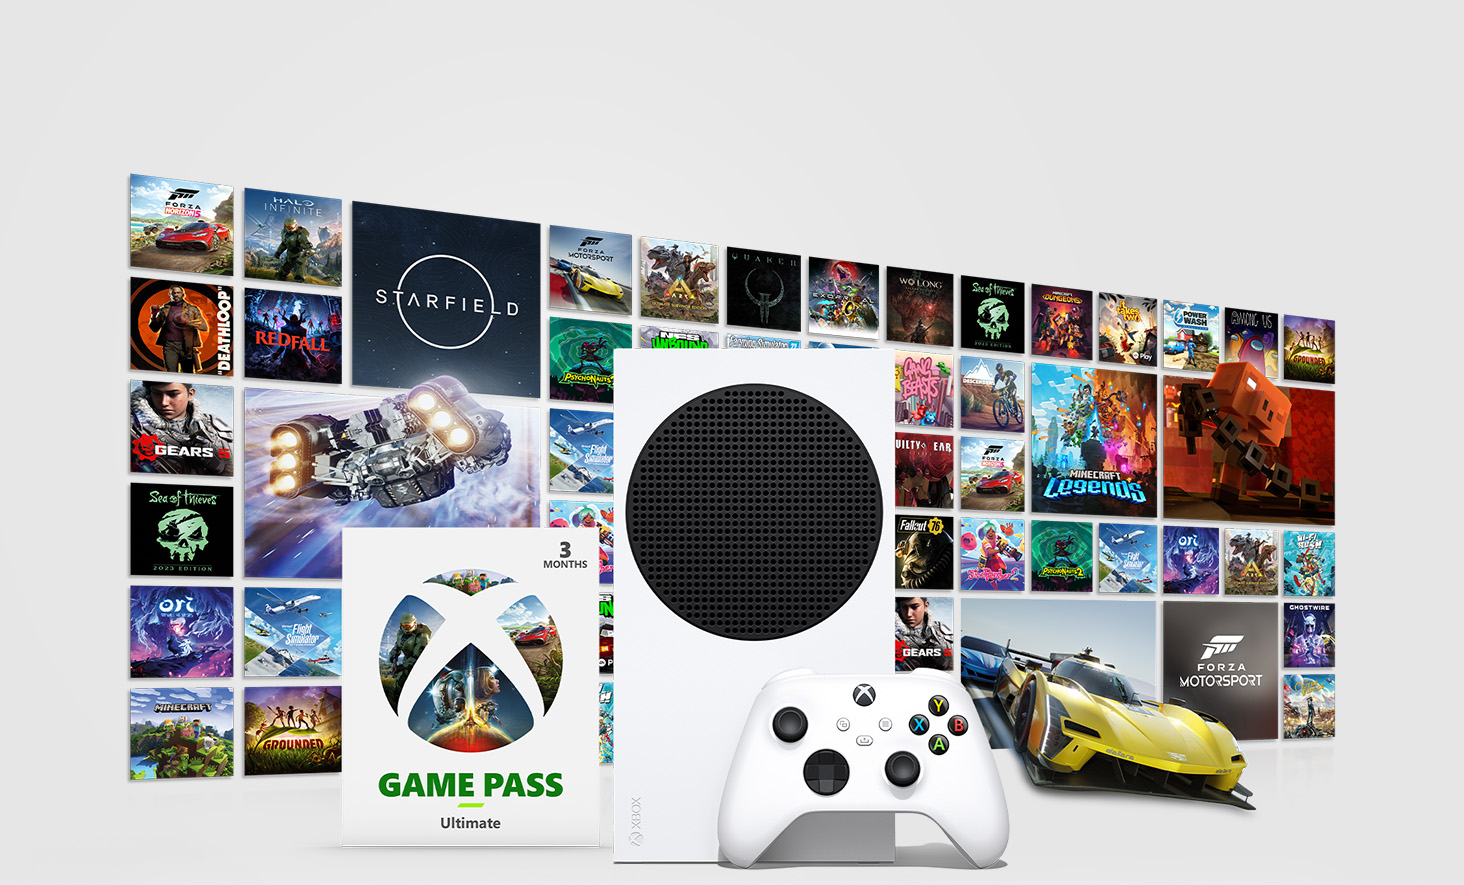 Xbox Series S – Starter Bundle - Includes hundreds of games with Game Pass  Ultimate 3 Month Membership - 512GB SSD All-Digital Gaming Console